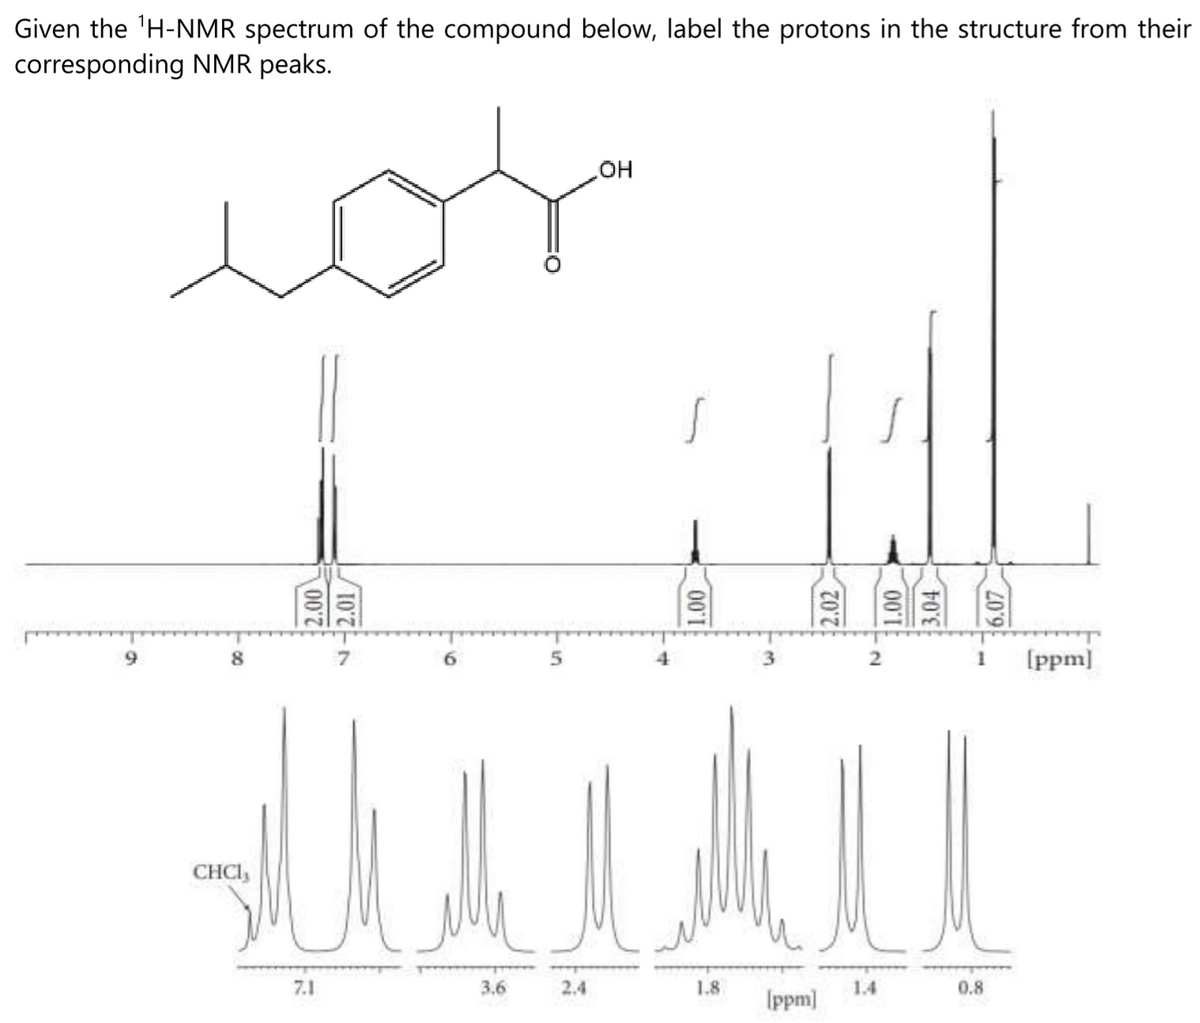 Given the 'H-NMR spectrum of the compound below, label the protons in the structure from their
corresponding NMR peaks.
он
9.
6.
5
[ppm]
CHCI,
7.1
3.6
2.4
1.8
1.4
0.8
Ippm]
00
-2.01
3
2.02
6.07
